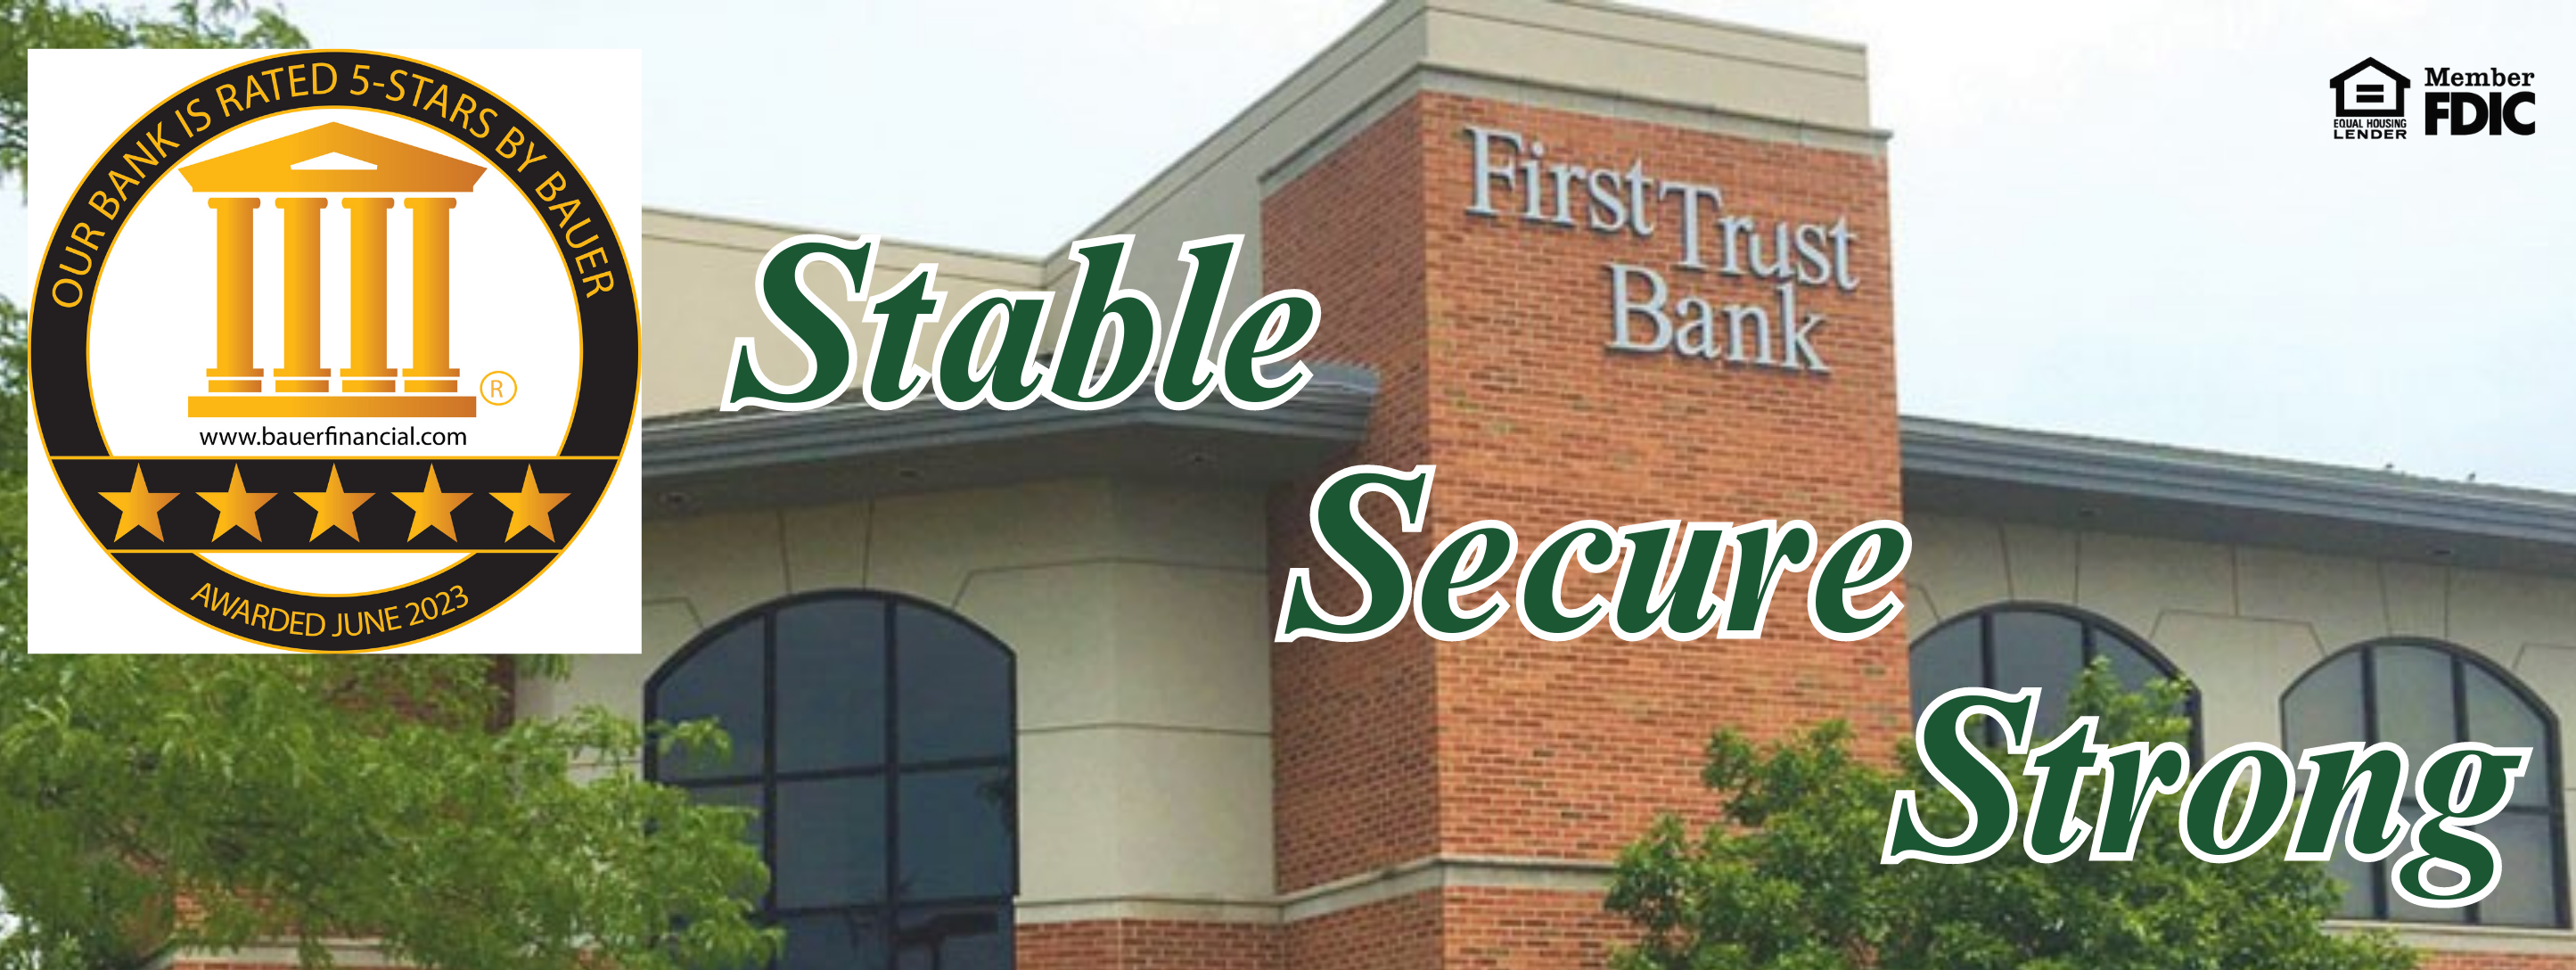 Our bank is rated 5-stars by bauer. Awarded june 2023 Stable Secure Strong